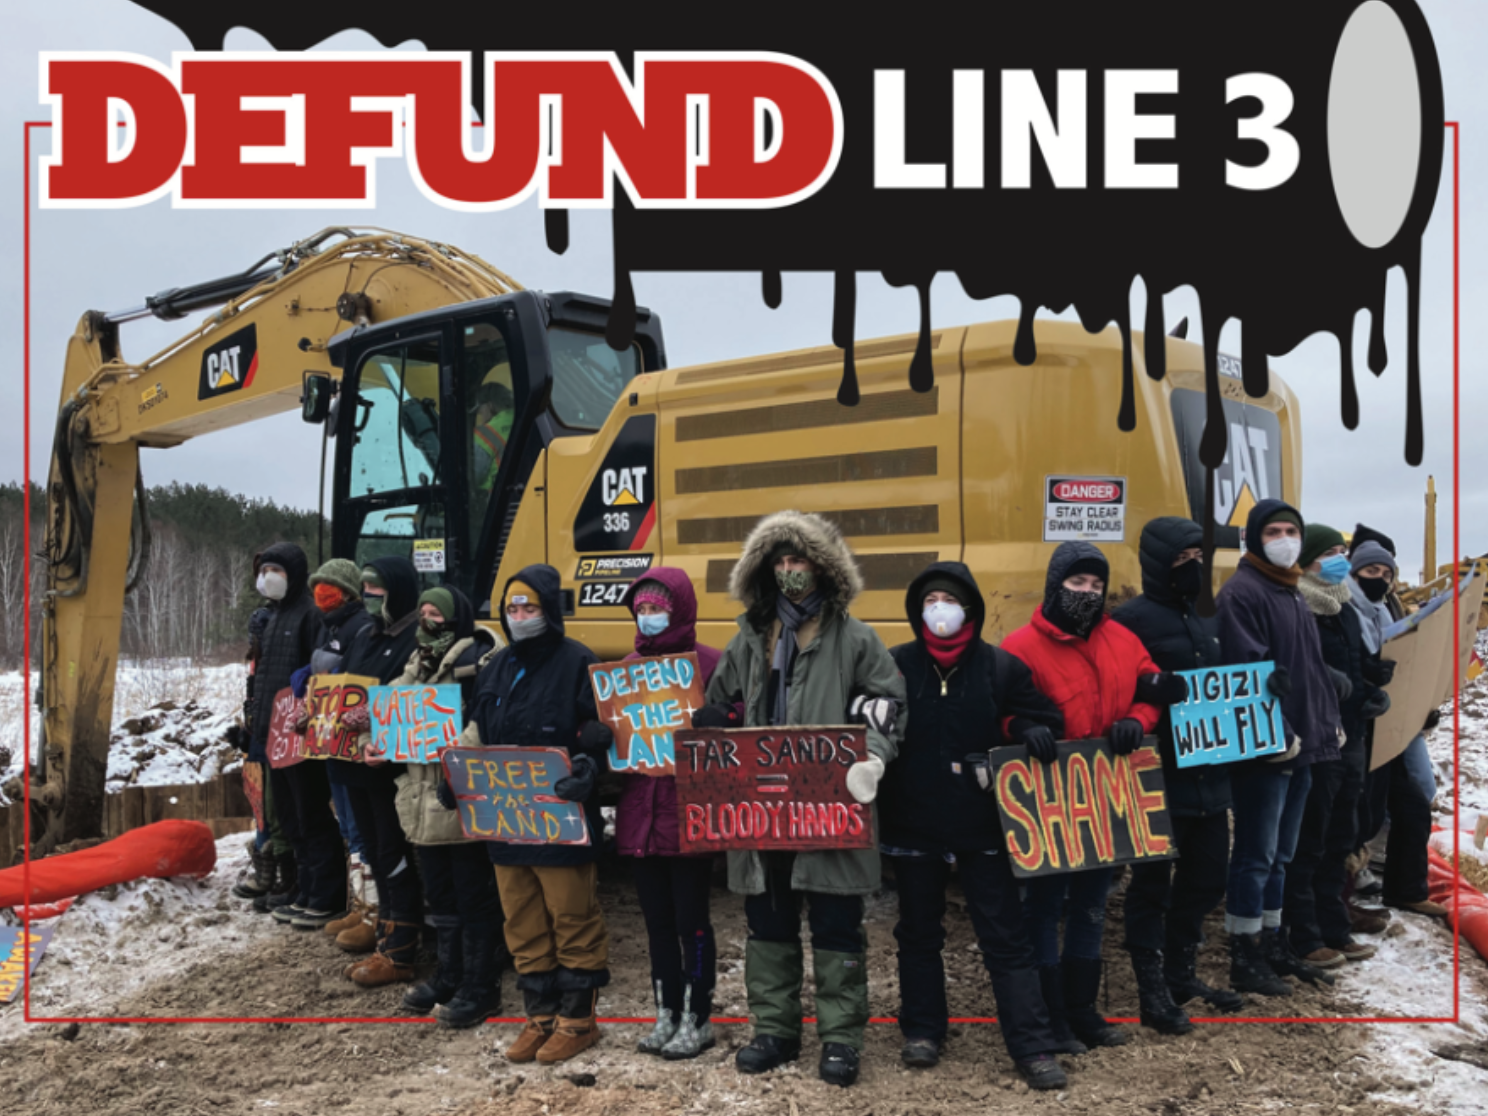 Protesters for defunding Line 3